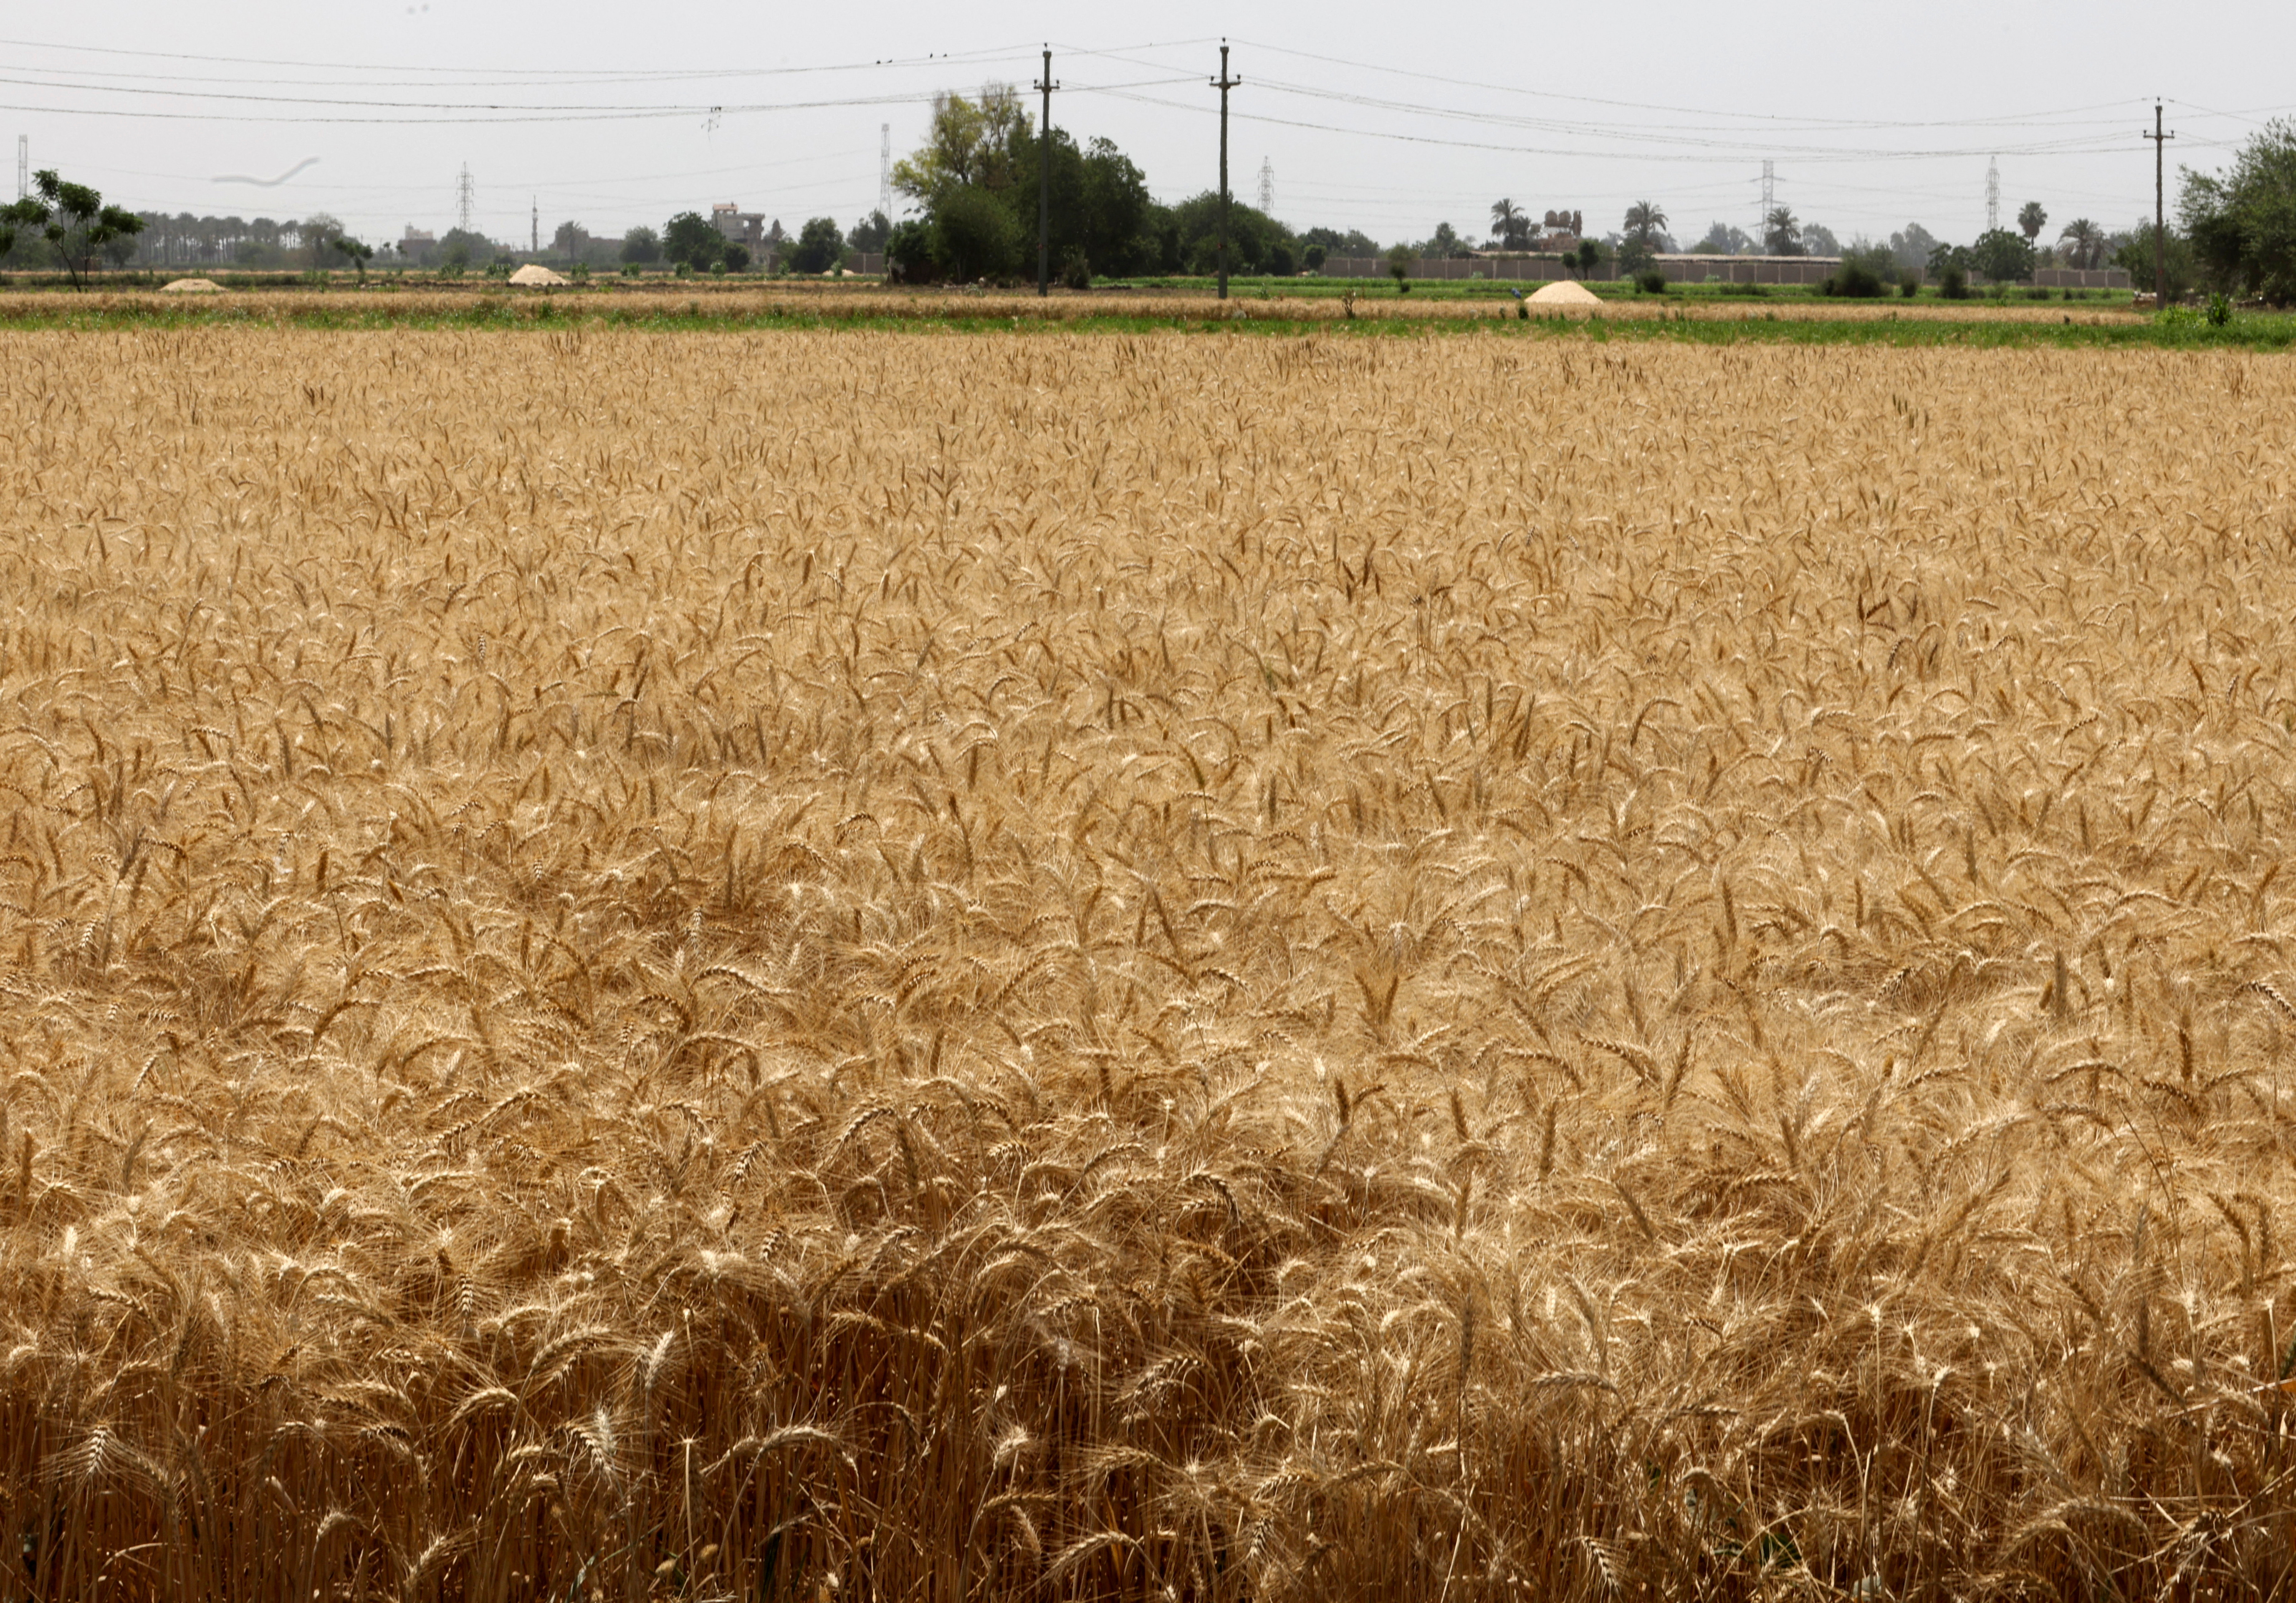 A general view shows a wheat field in Al Qalyubia Governorate